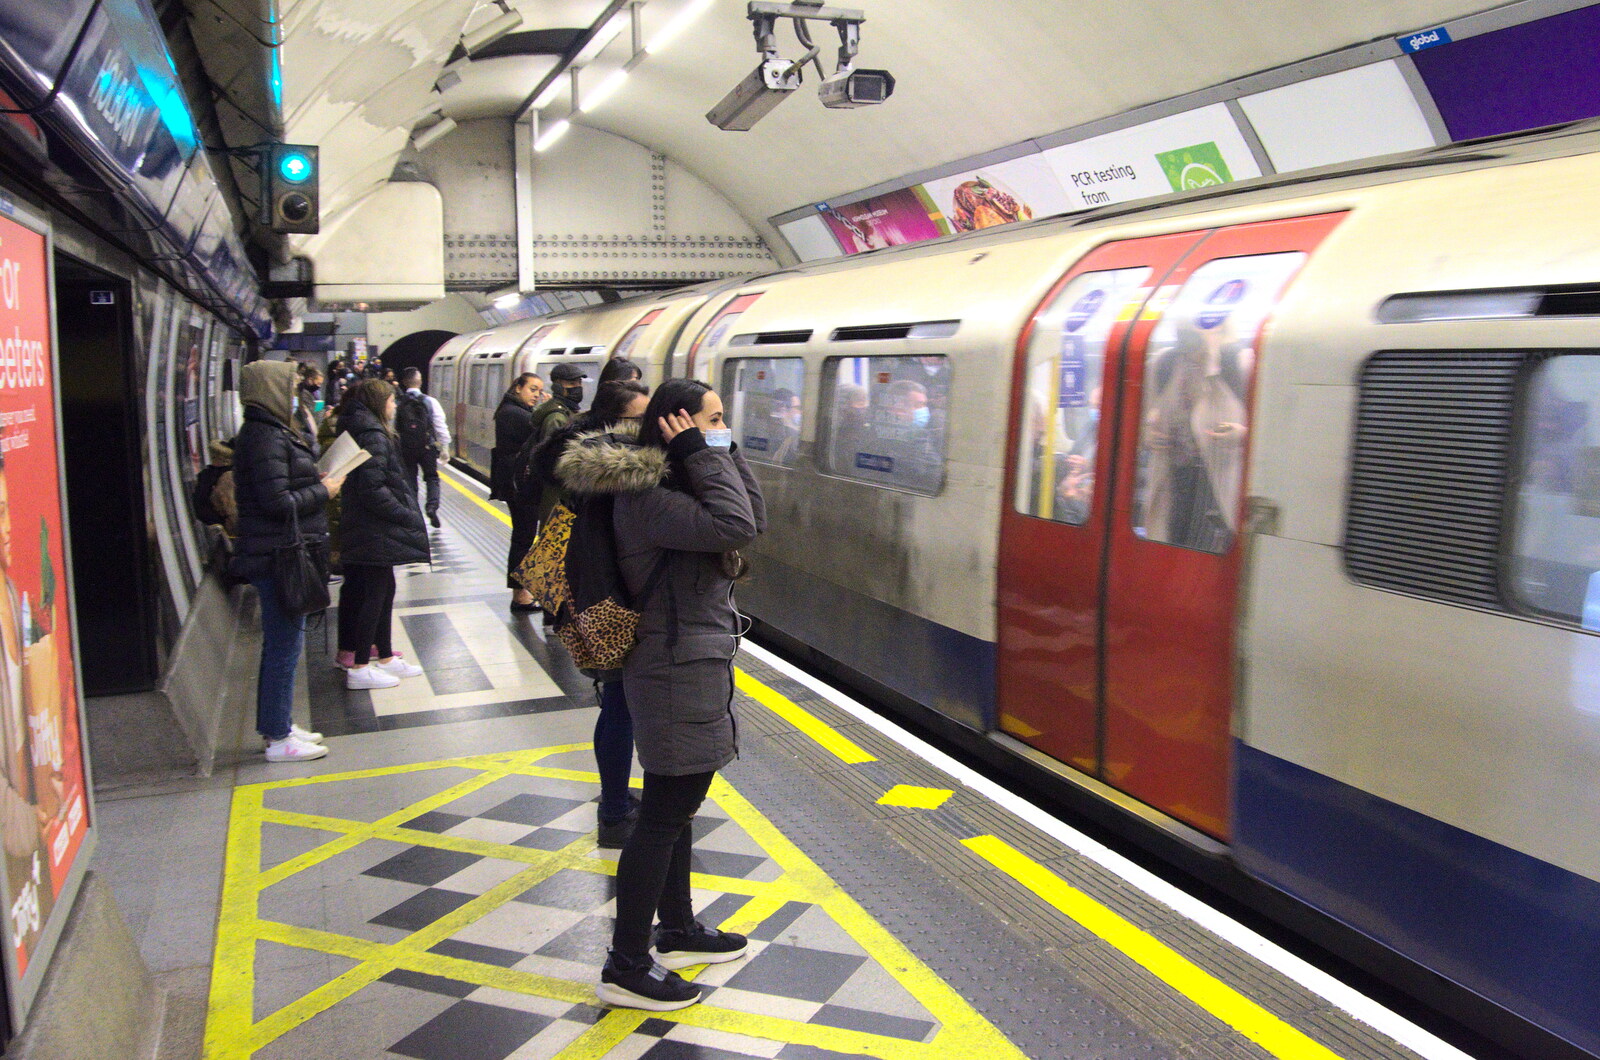 Another tube train arrives from A Trip to the Natural History Museum, Kensington, London - 15th January 2022